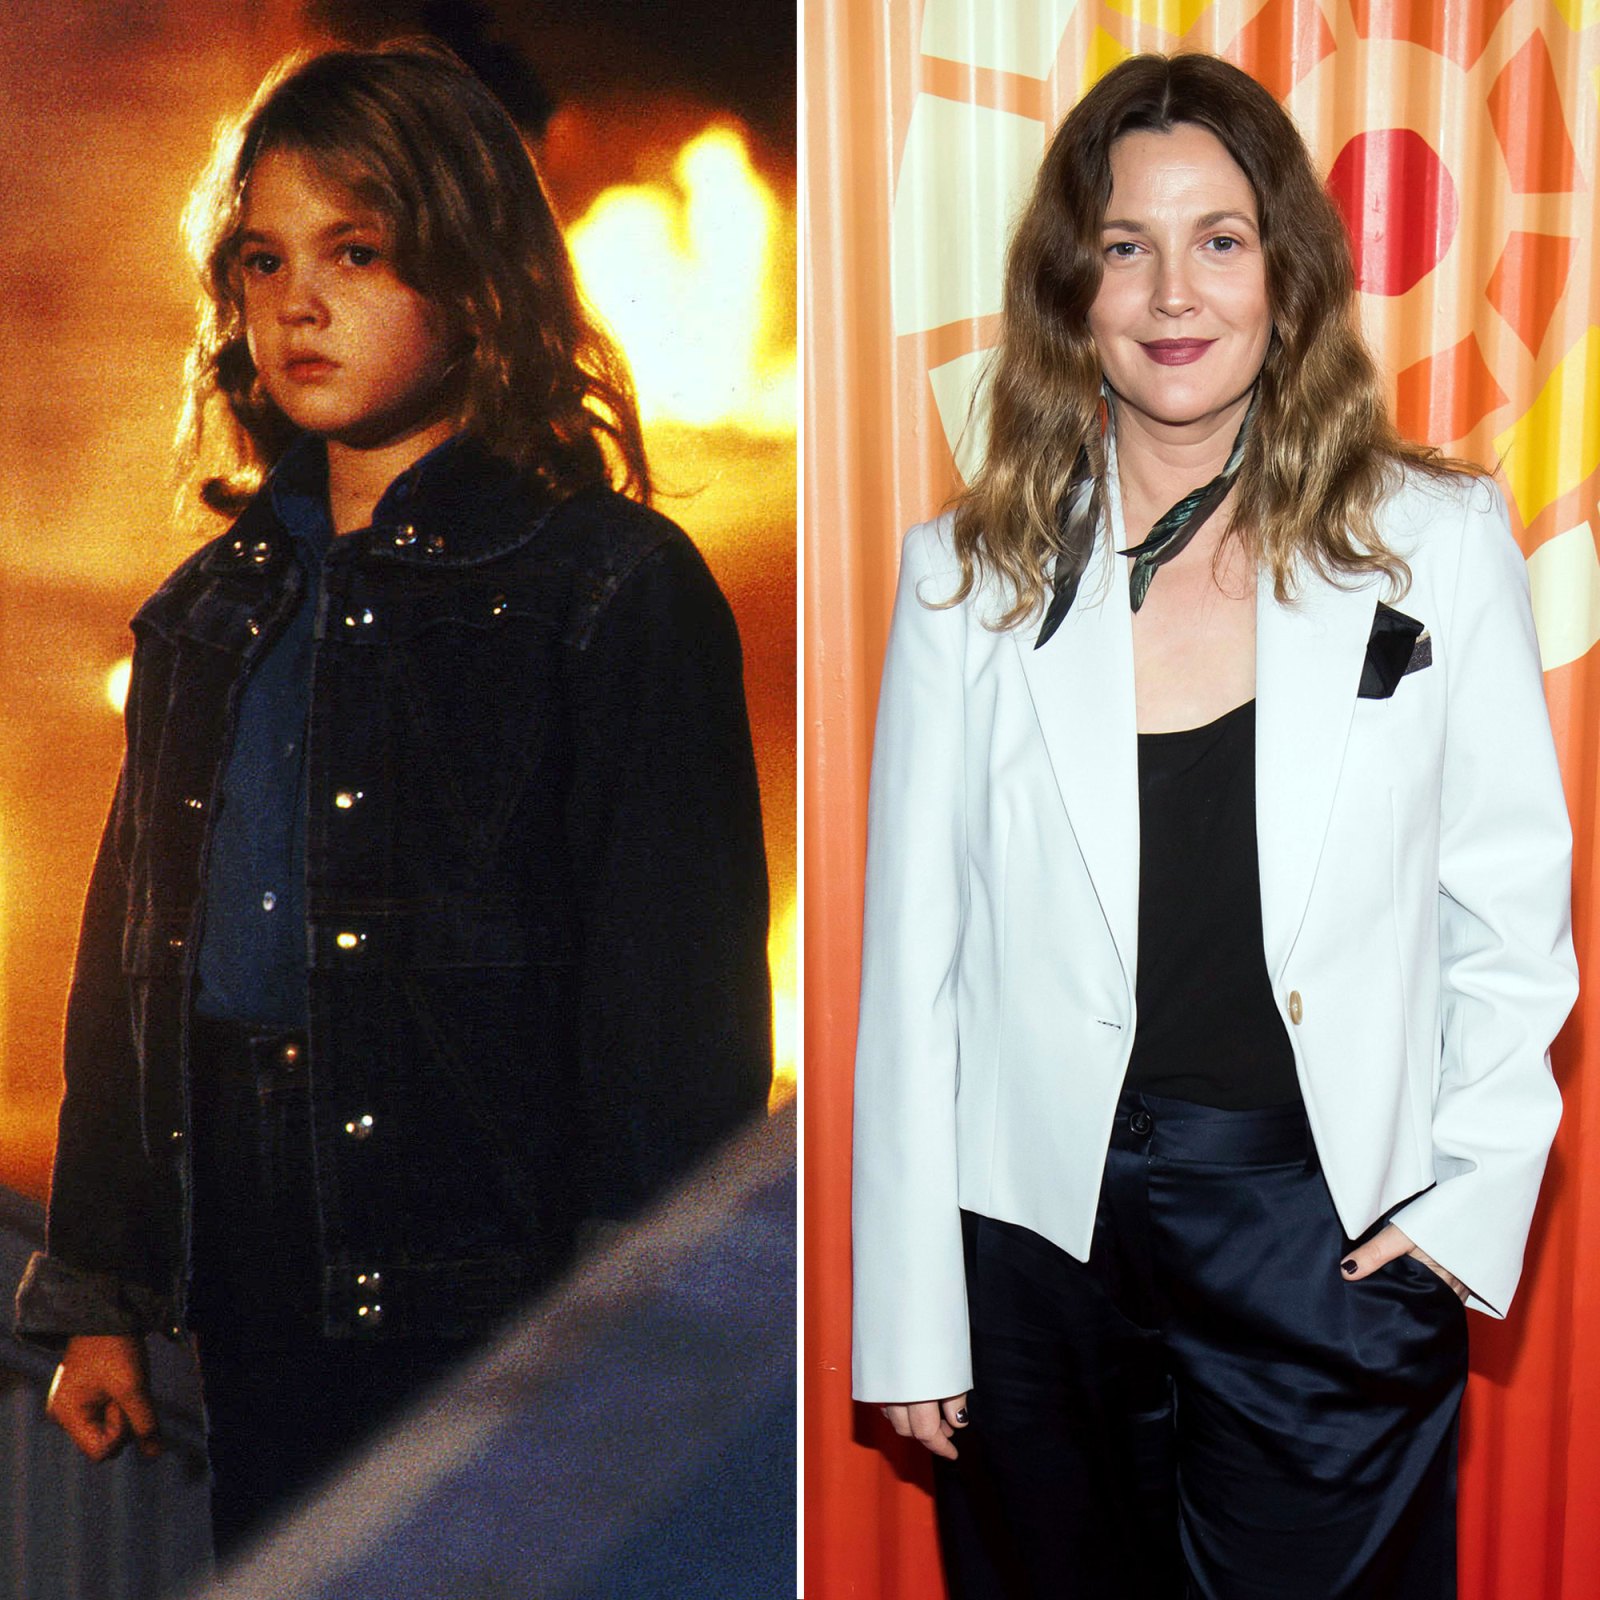 Drew Barrymore Creepy Horror Movie Kids Where Are They Now? Drew Barrymore Haley Joel Osment and More